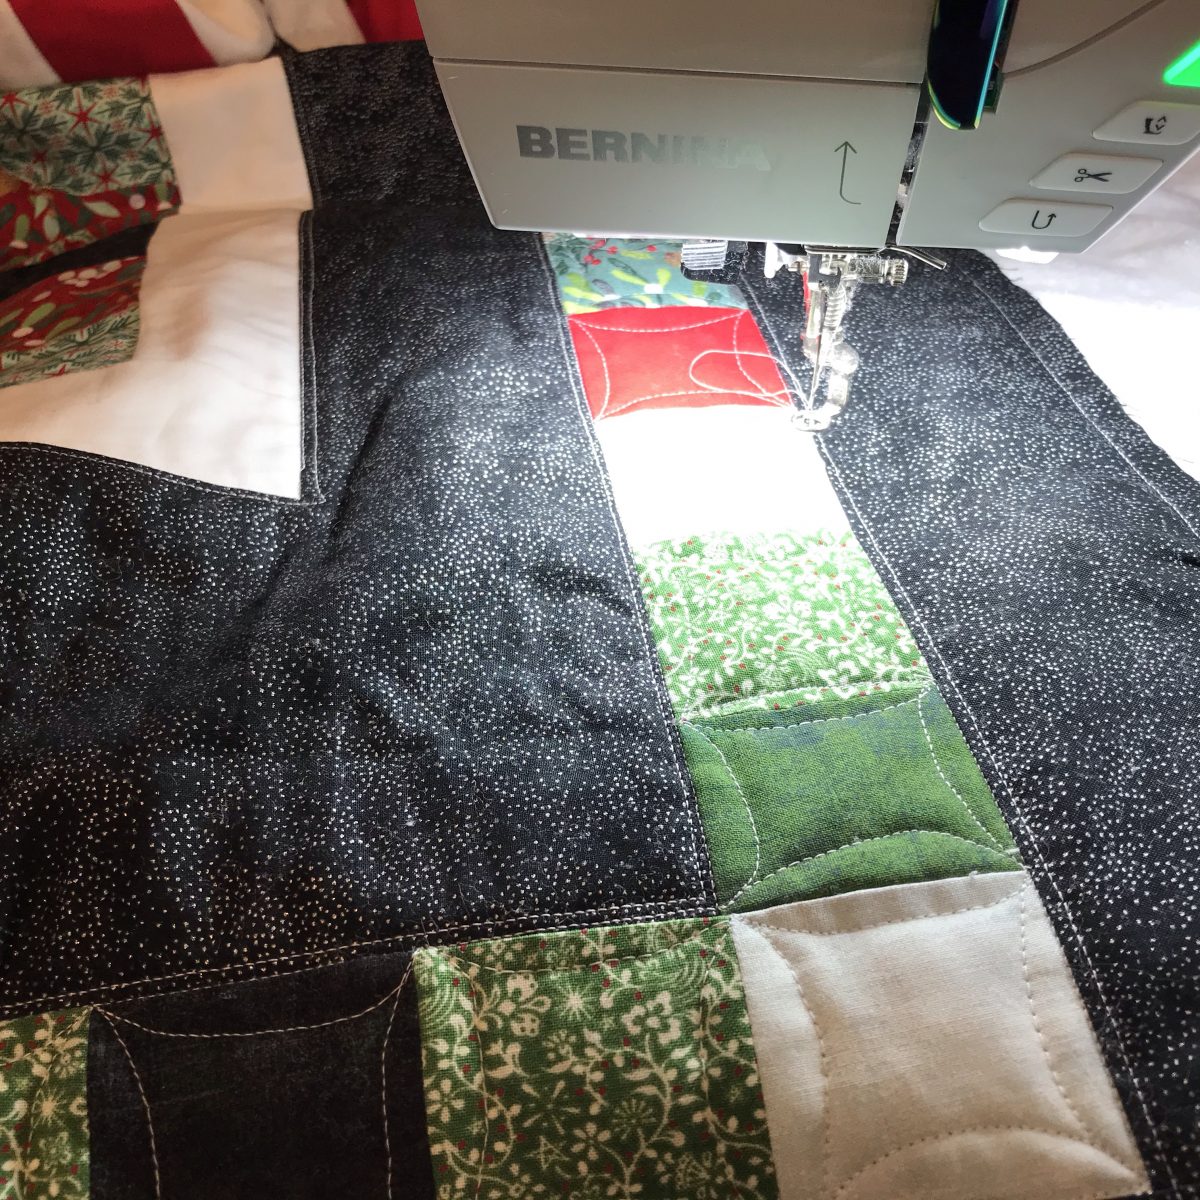 QUILT DIARY: Under the needle for January 2021